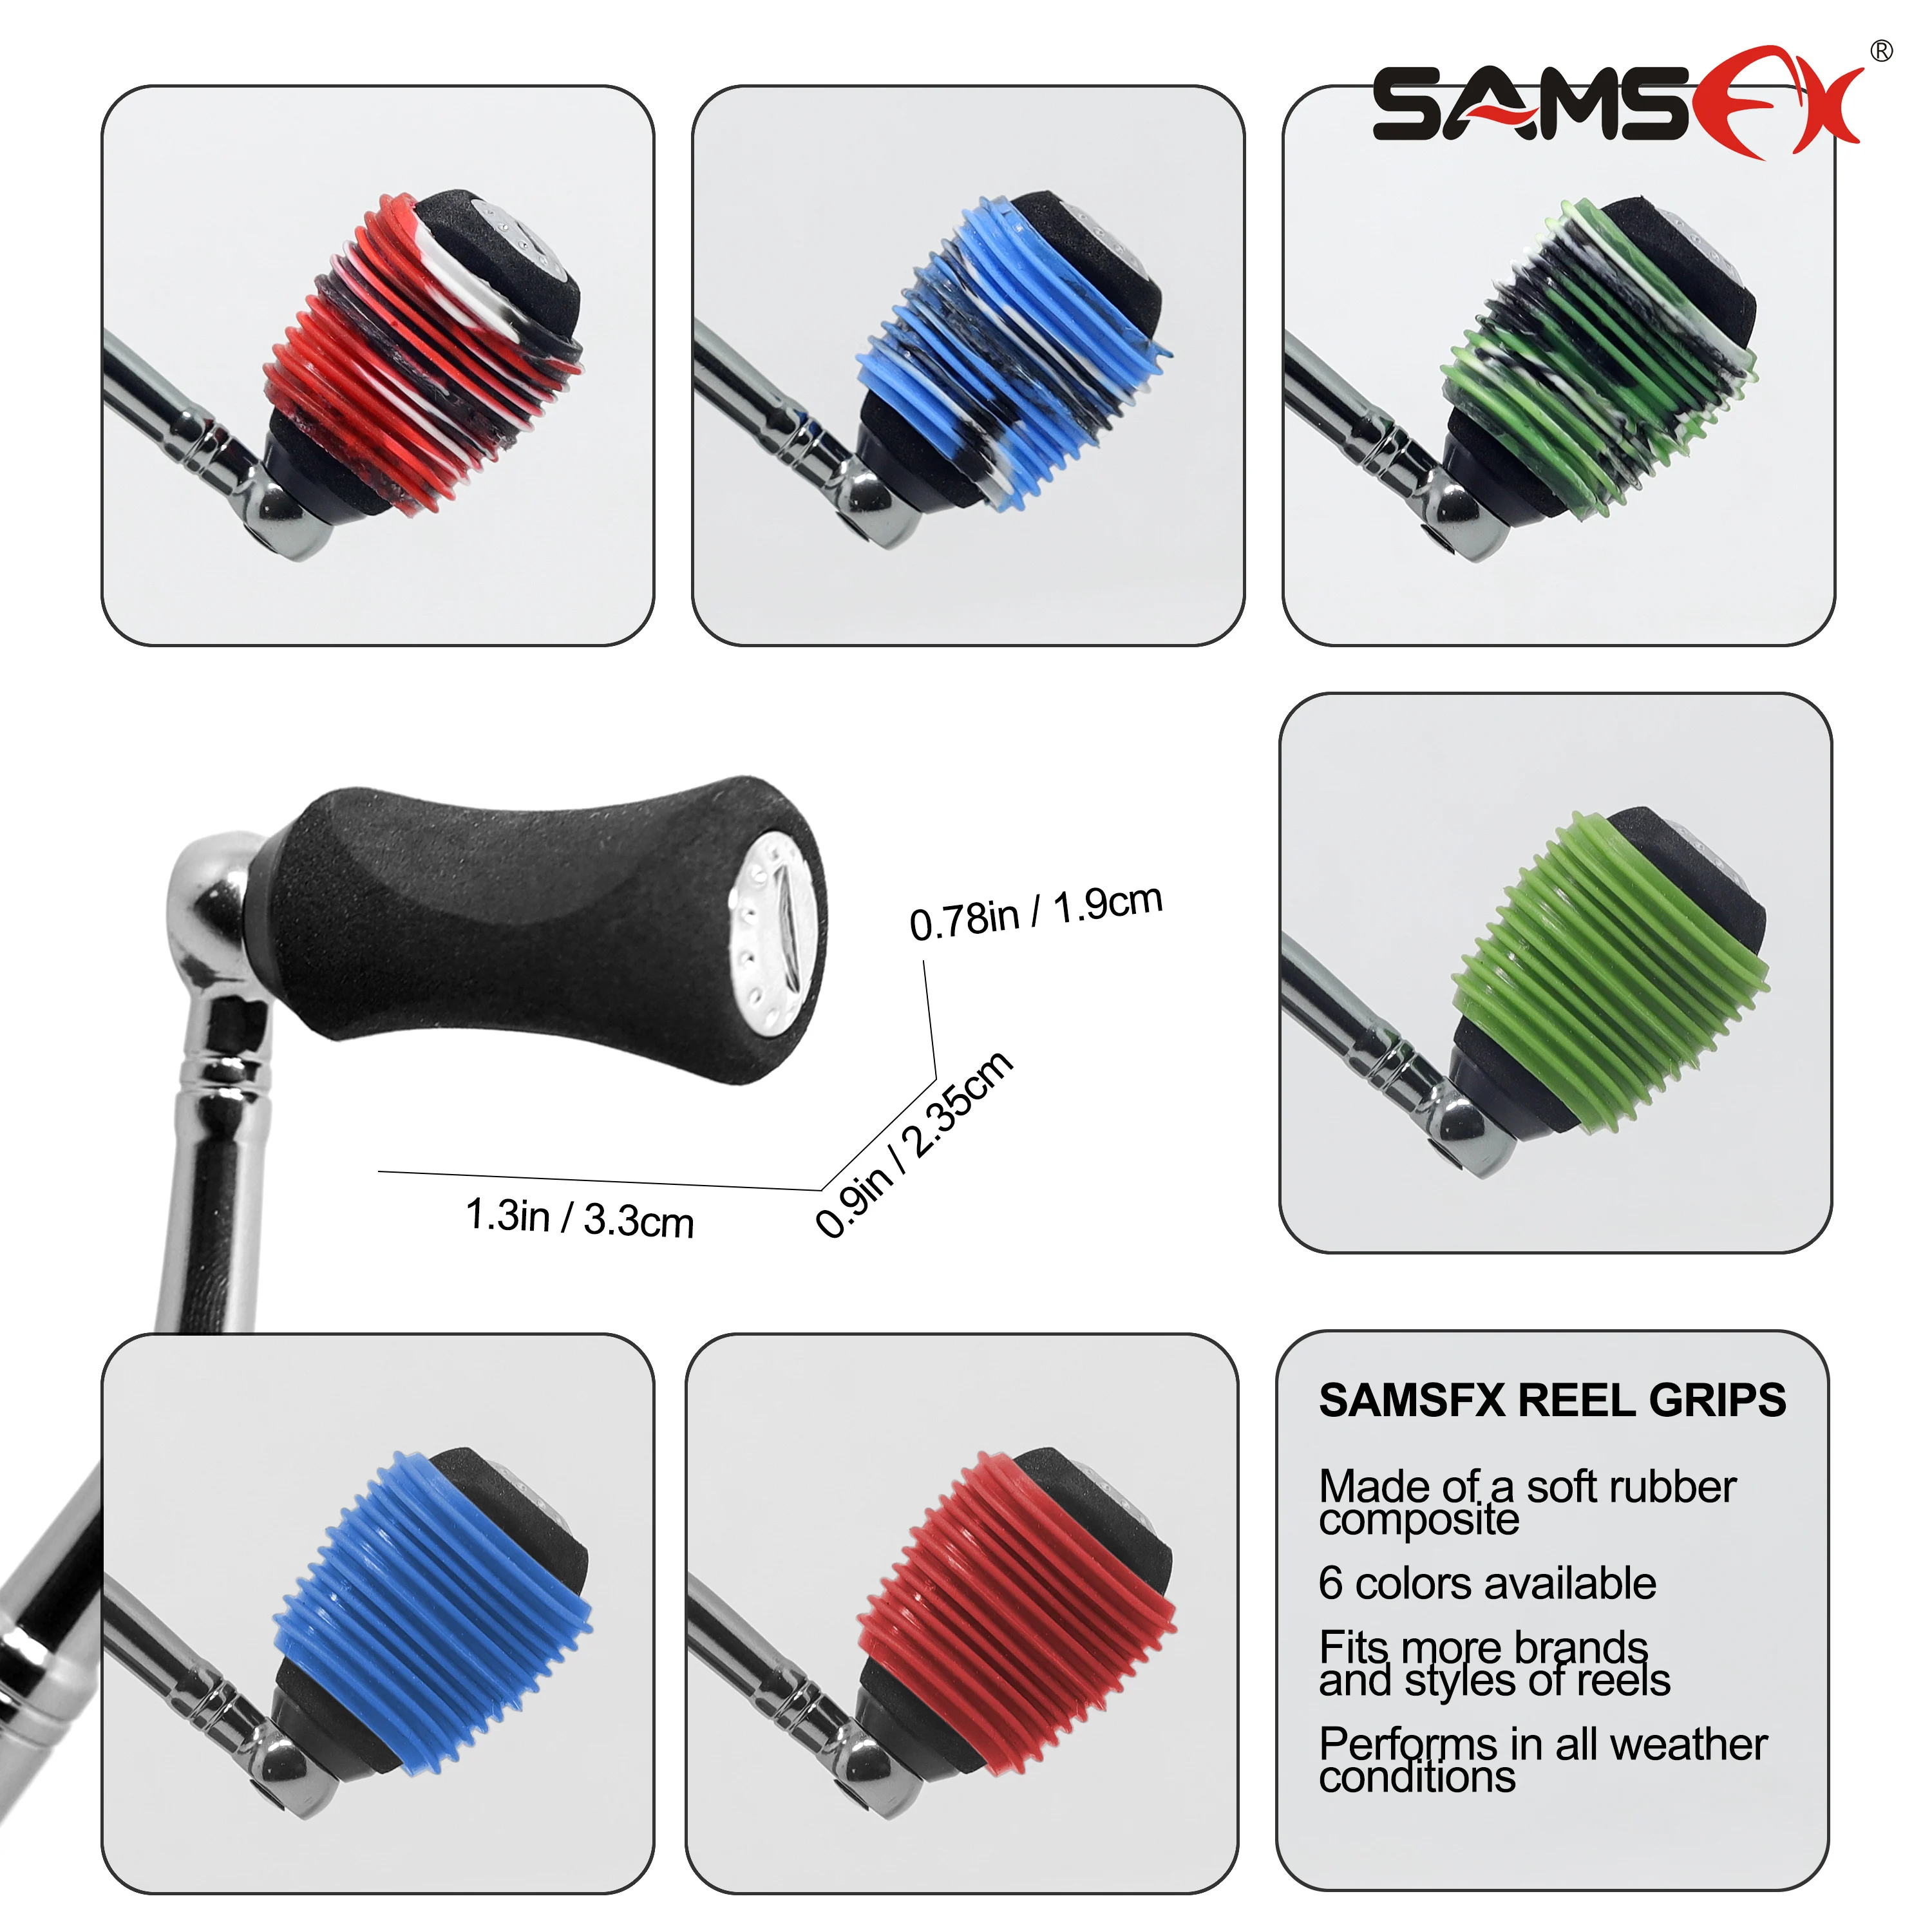 SAMSFX Rubber Fishing Reel Handle Grip Sleeve Non-Slip Baitcaster Knob Covers for Casting or Spinning Reel 